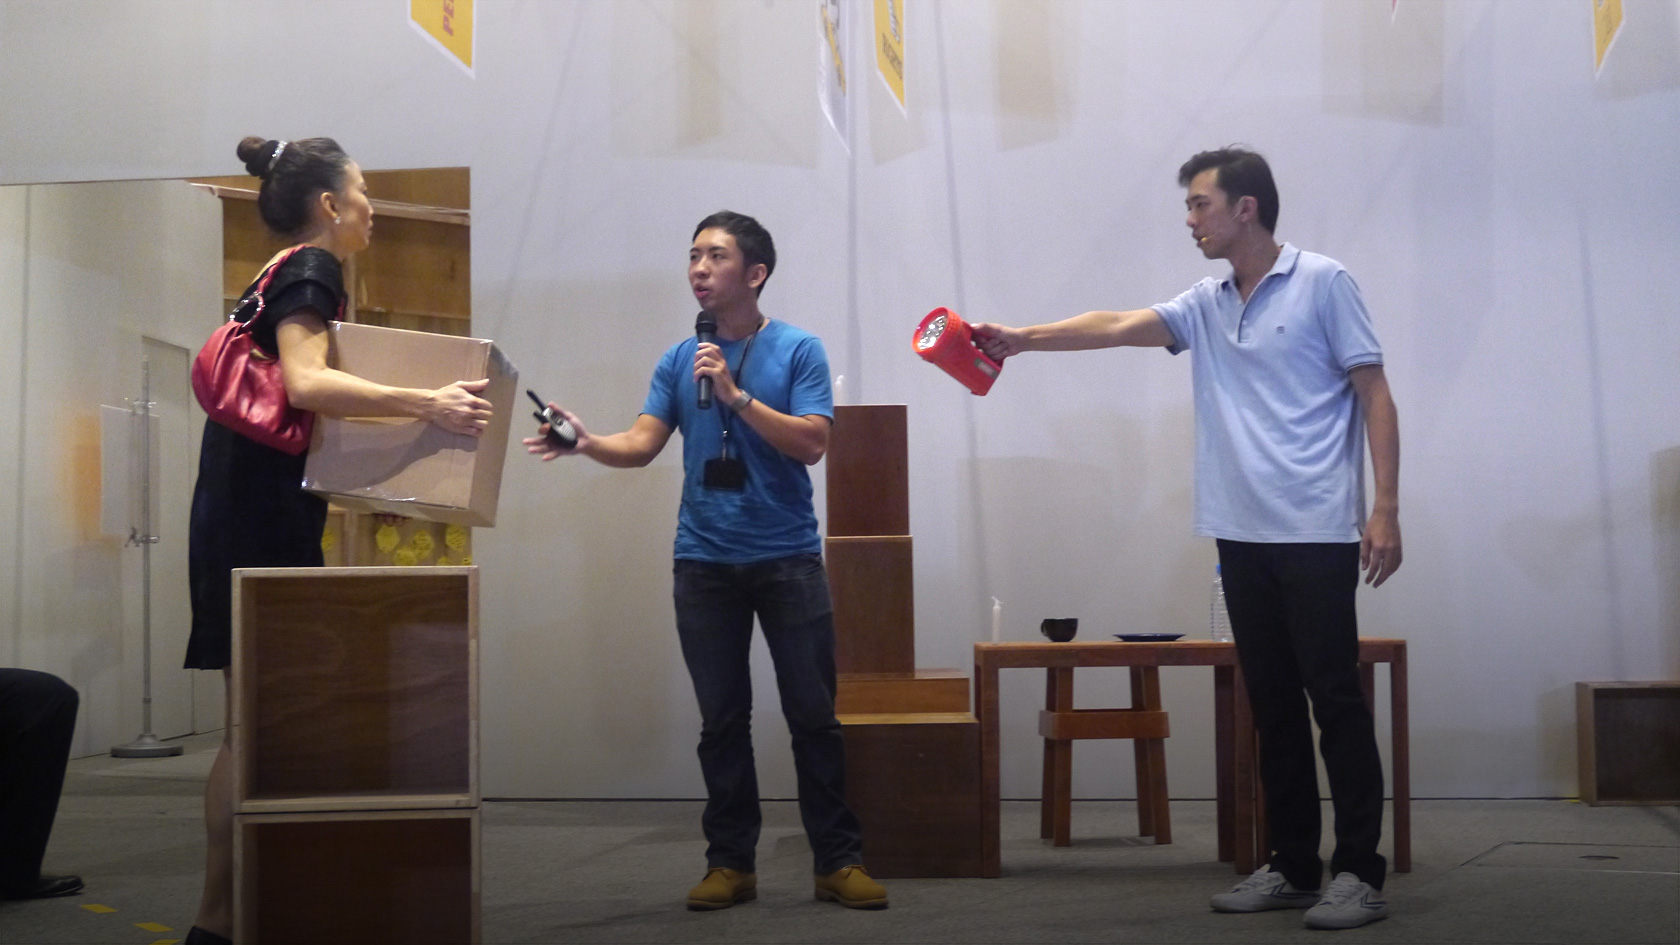 Image taken from IPS Prism (2012) forum theatre where a performer is holding onto a cardboard box and the other torch light with the emcee facilitating the dialogue